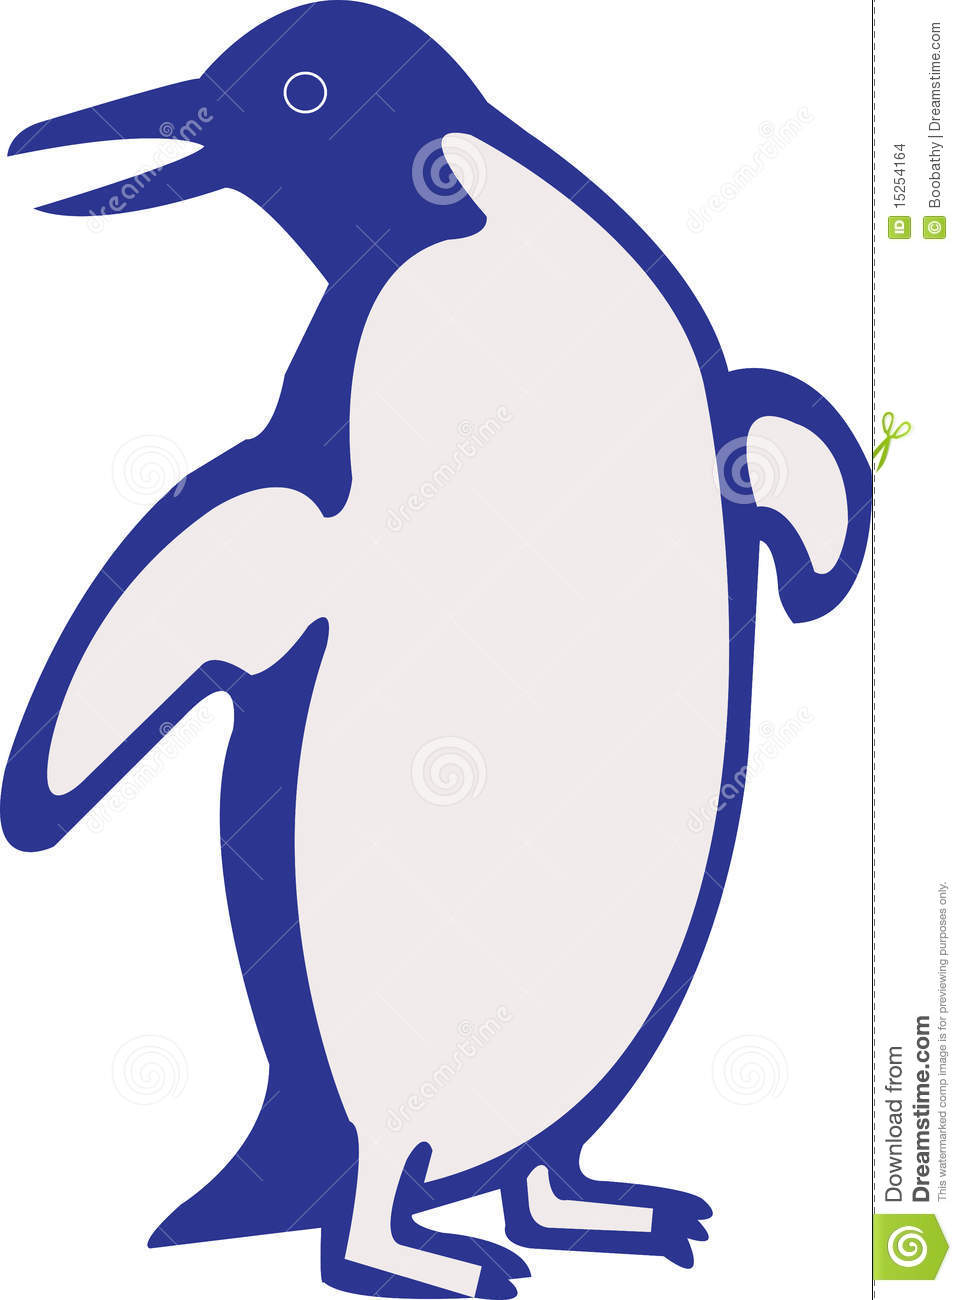 Illustration Of Penguin With Isolated Background Mr No Pr No 2 1218 4